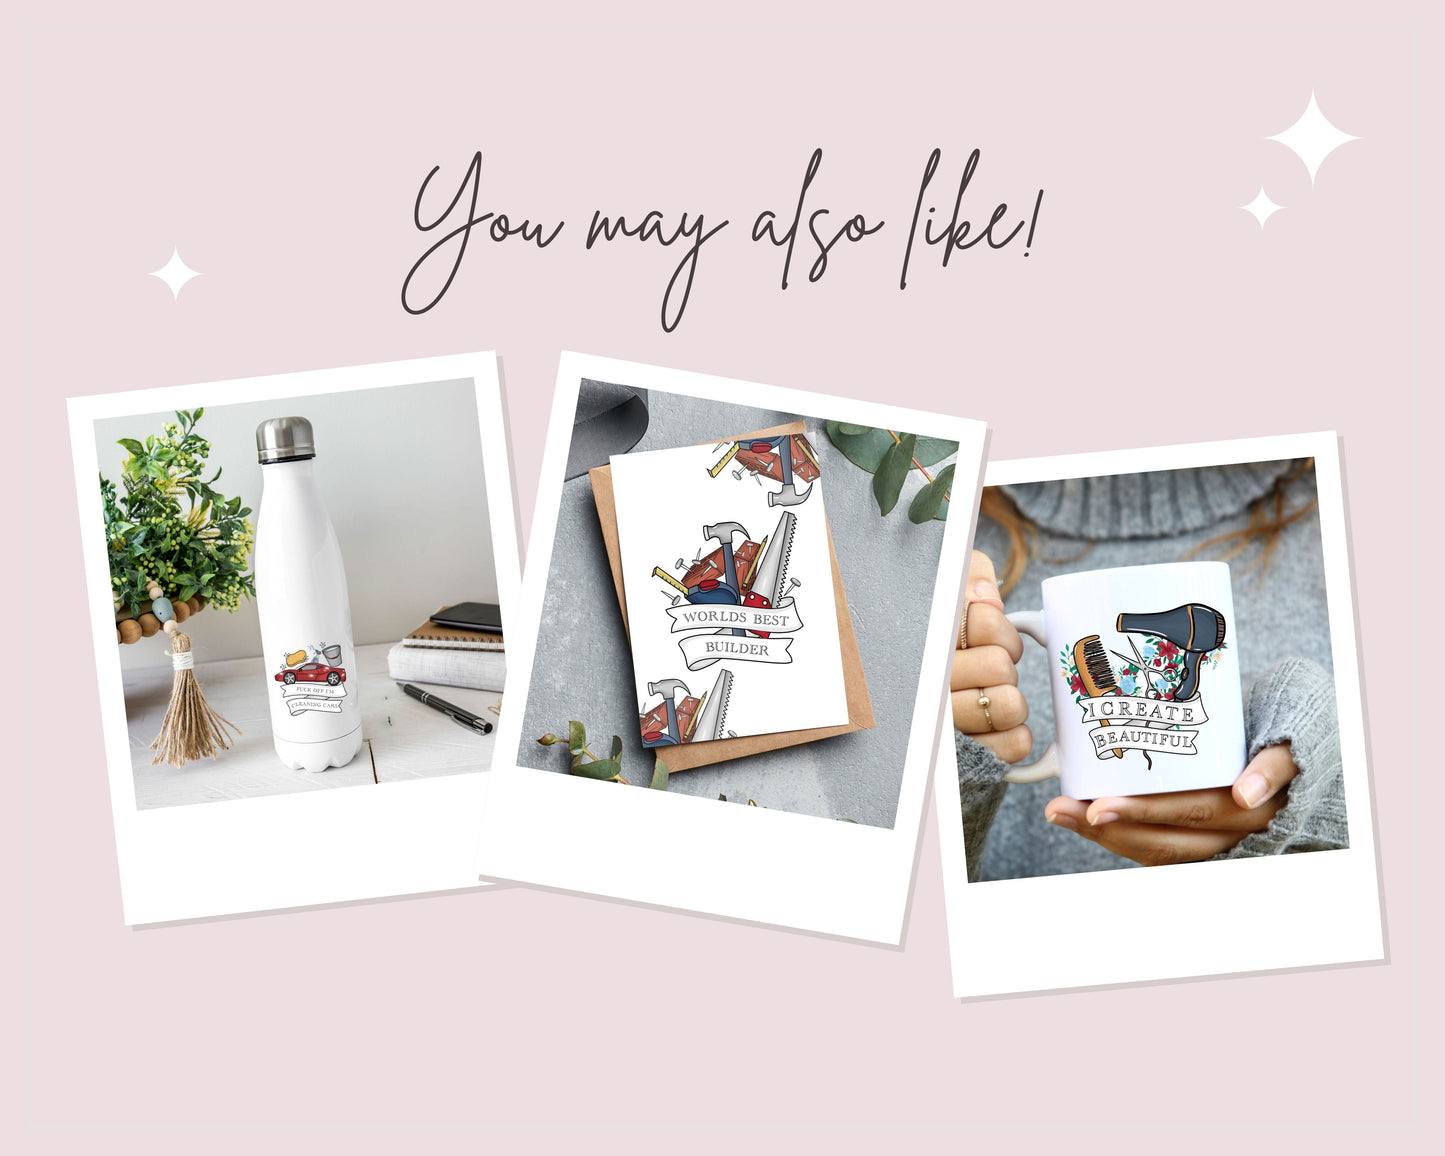 Inspirational Gifts For Friends | Inspiring Gifts For Her